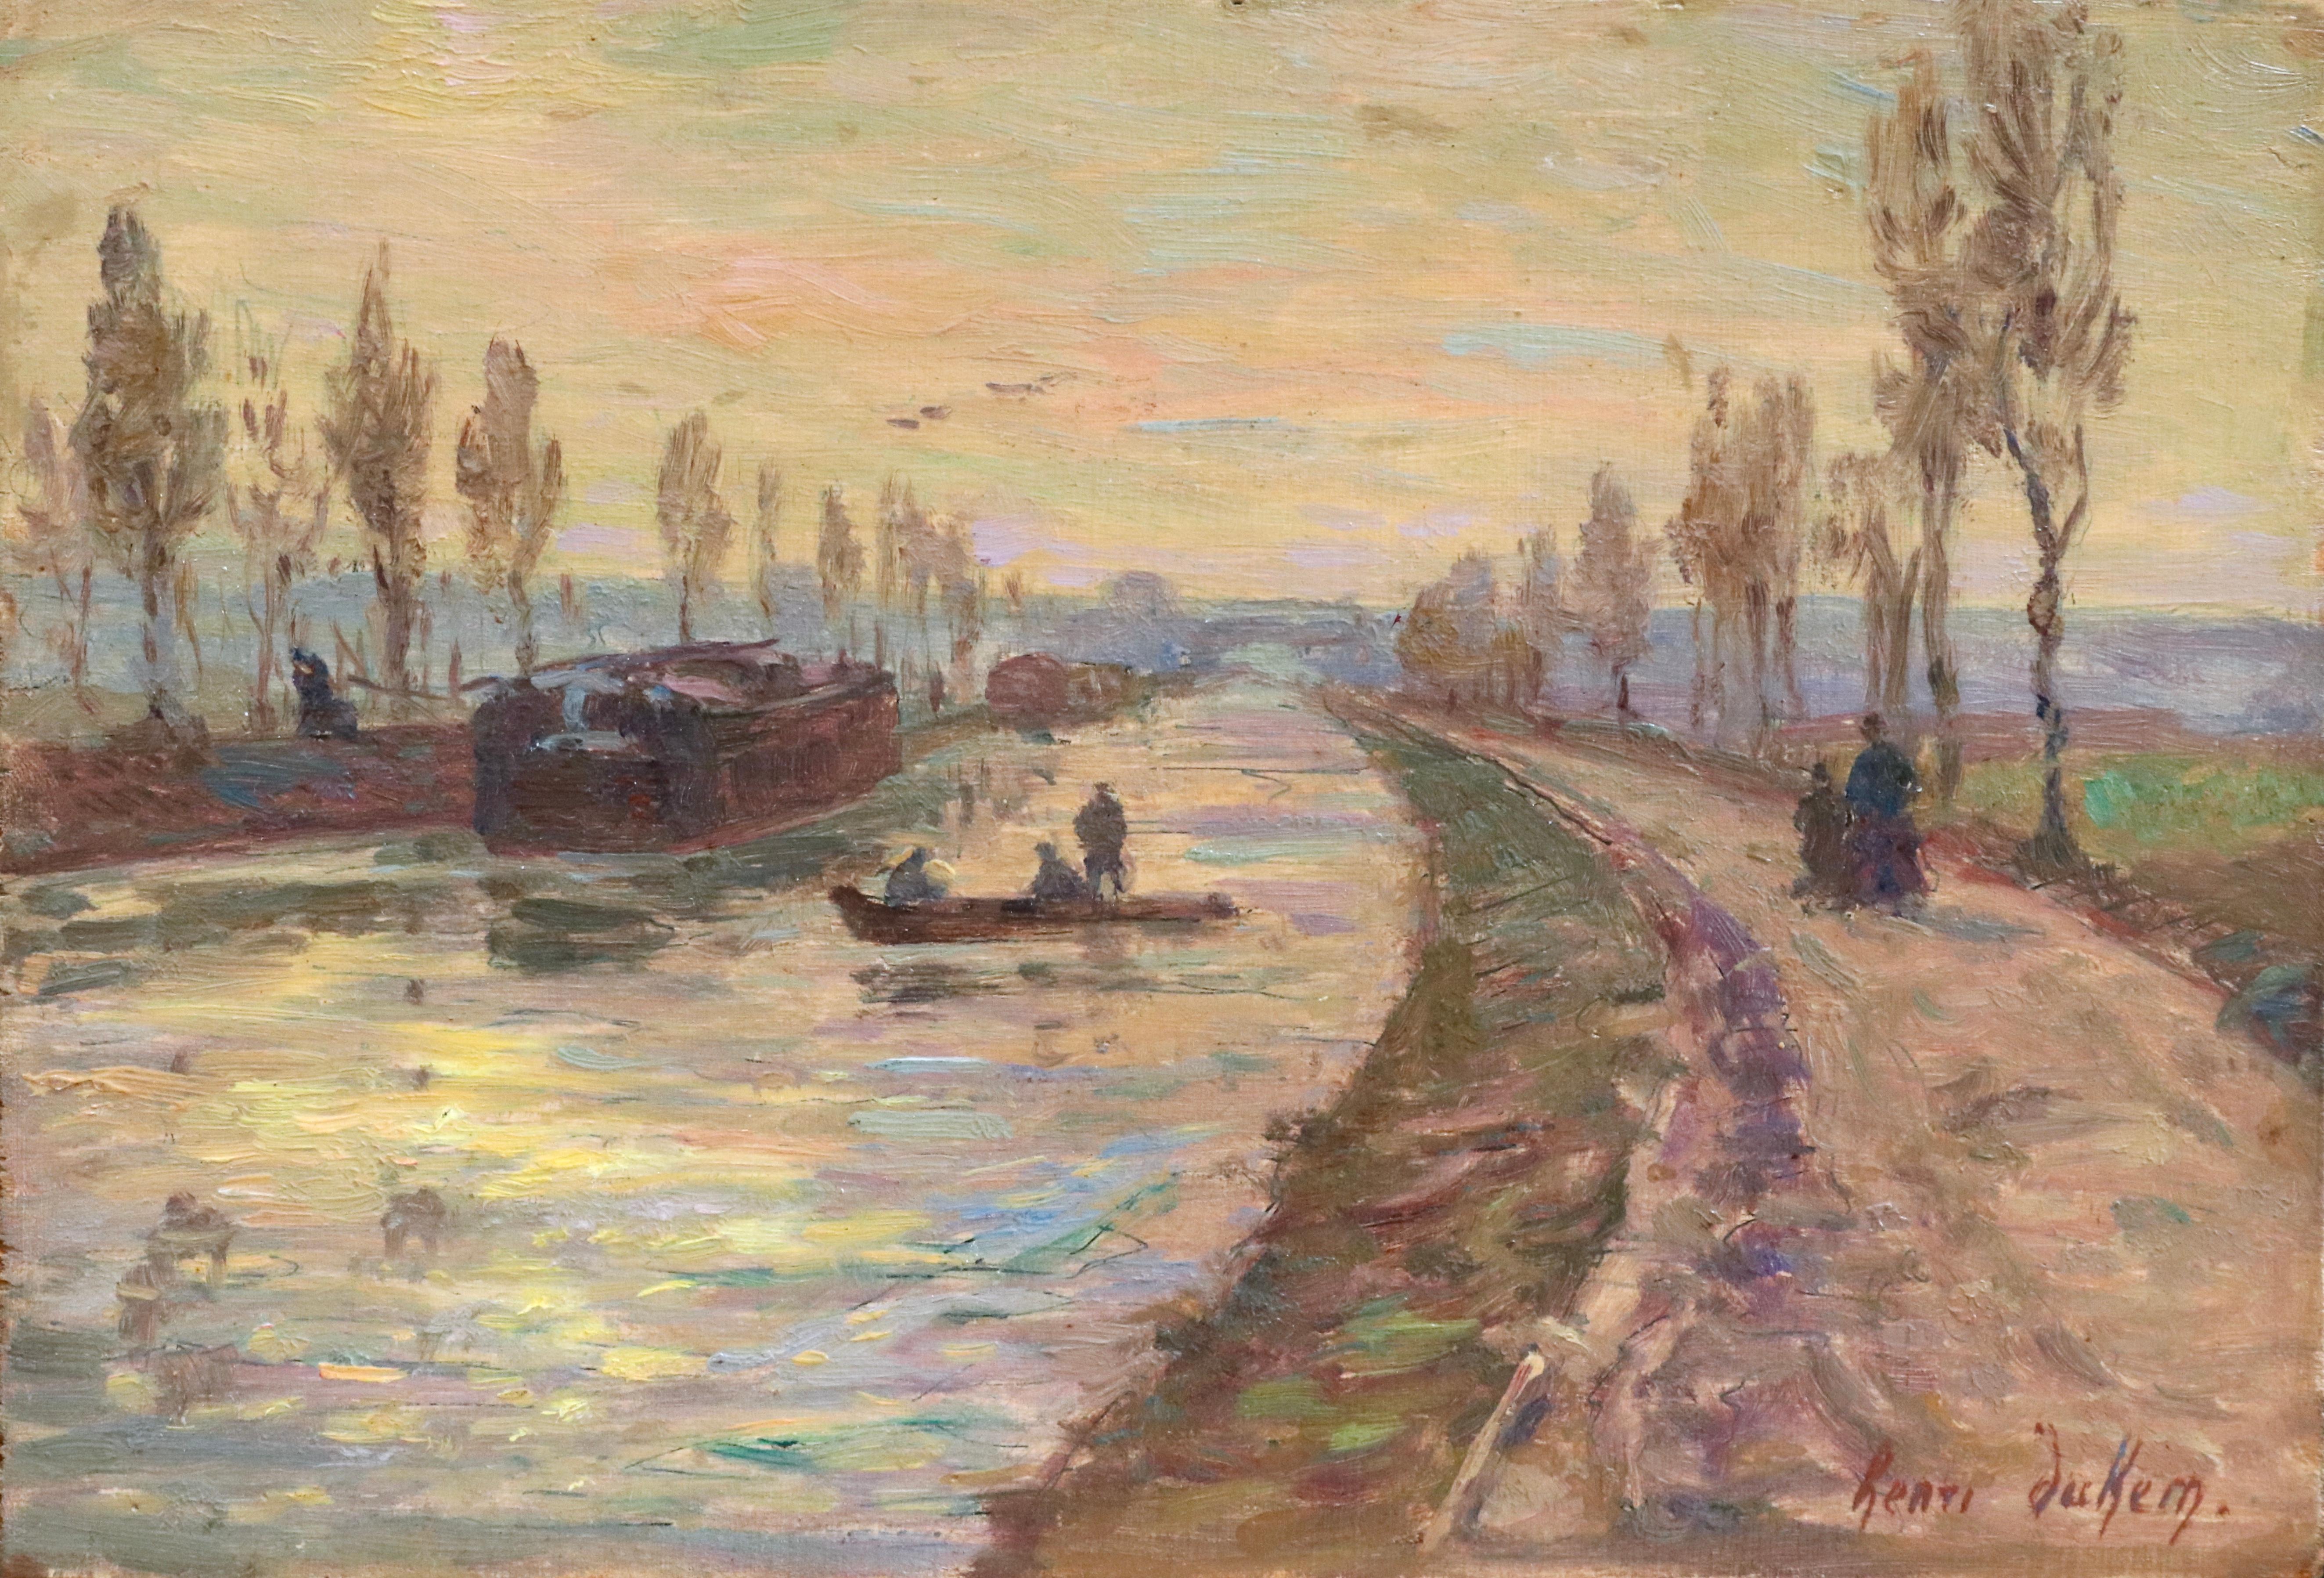 Sunset over the Canal - Douai - 19th Century Oil, Figures in Landscape by Duhem